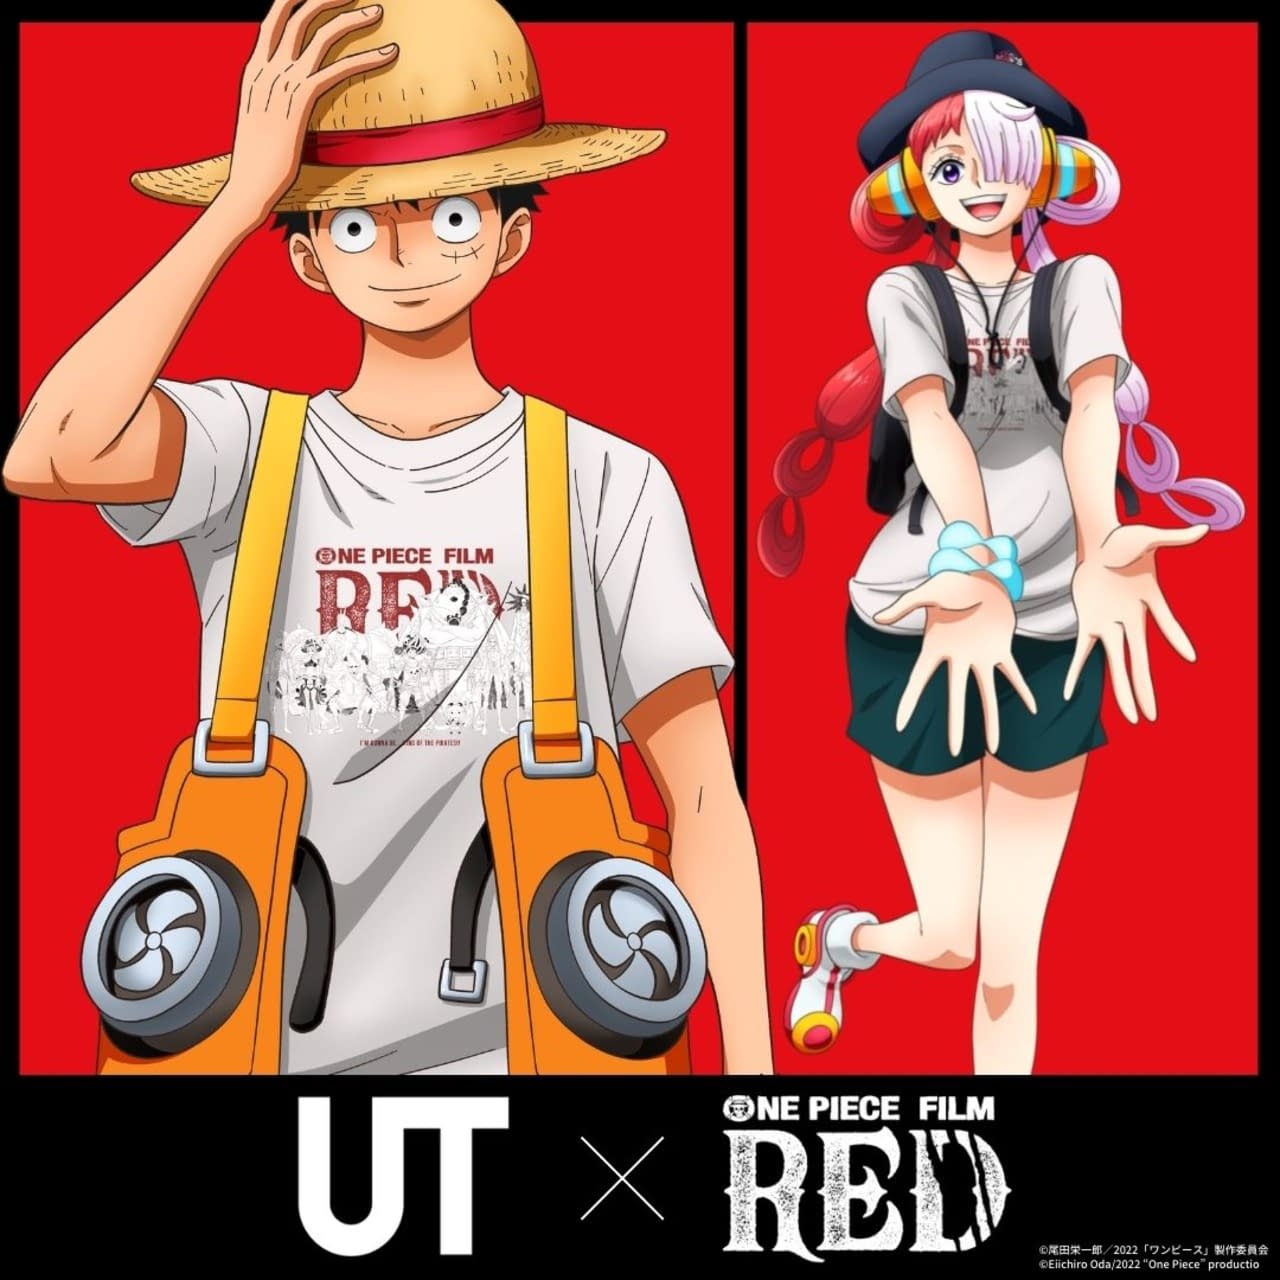 Crunchyroll Sets Theatrical Release For 'One Piece Film Red